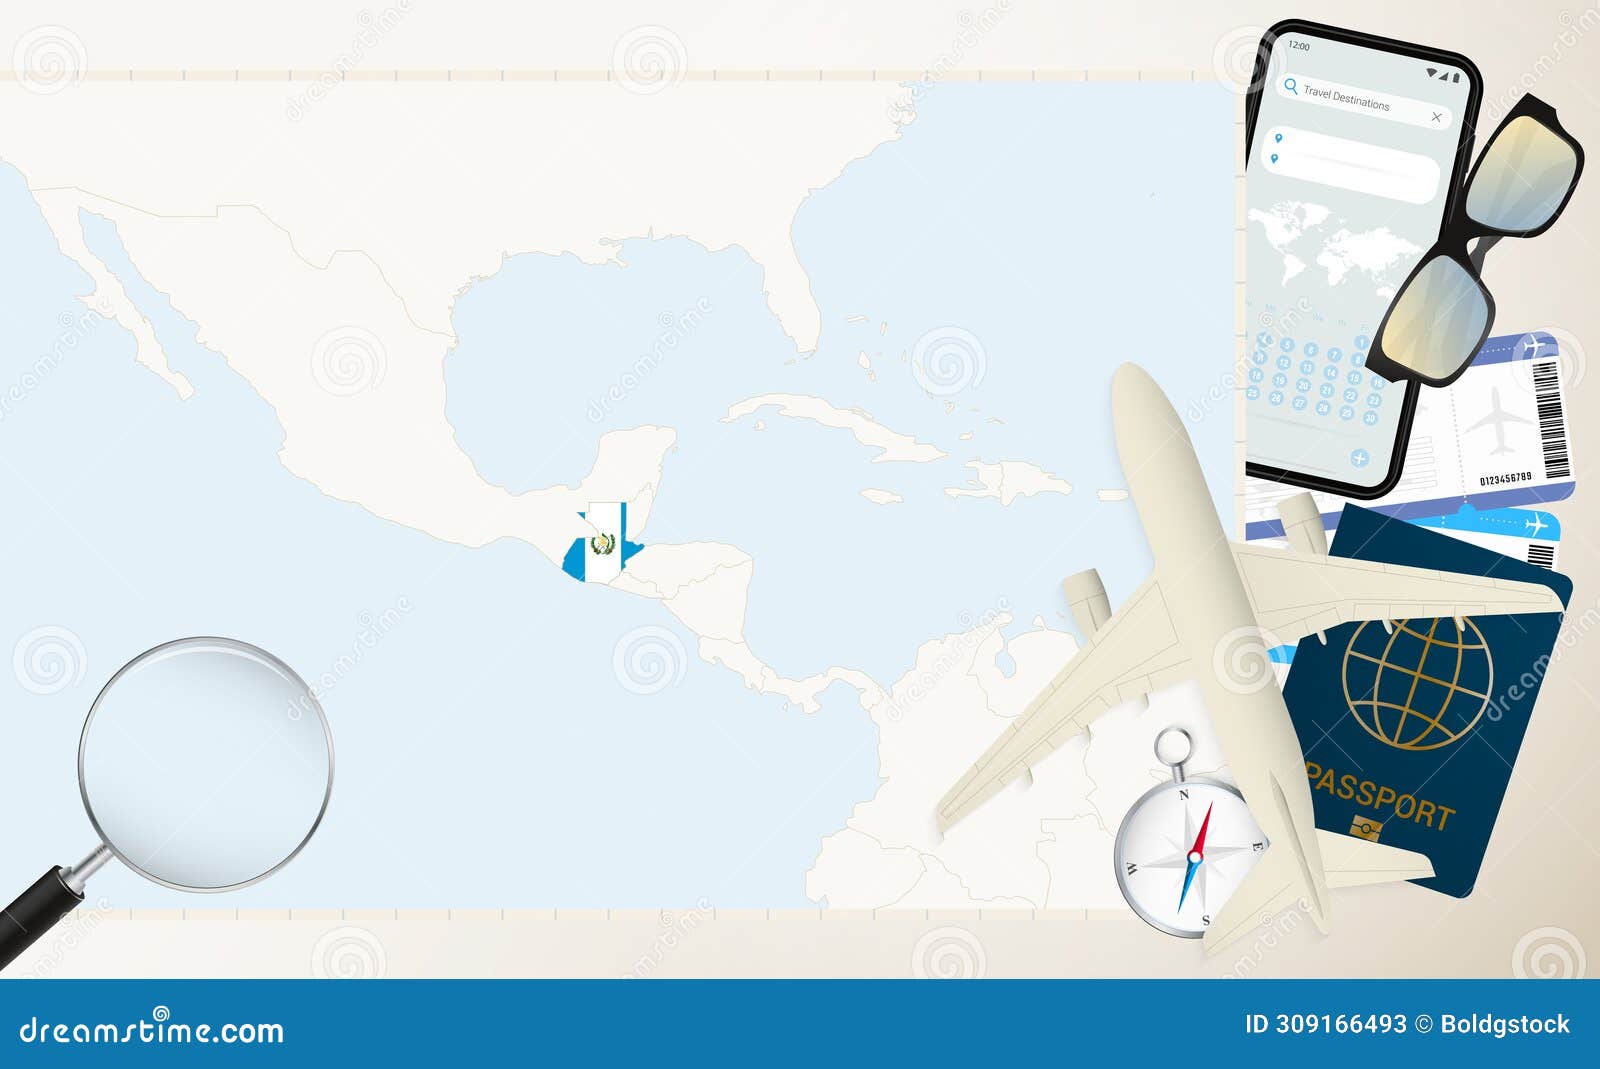 guatemala map and flag, cargo plane on the detailed map of guatemala with flag